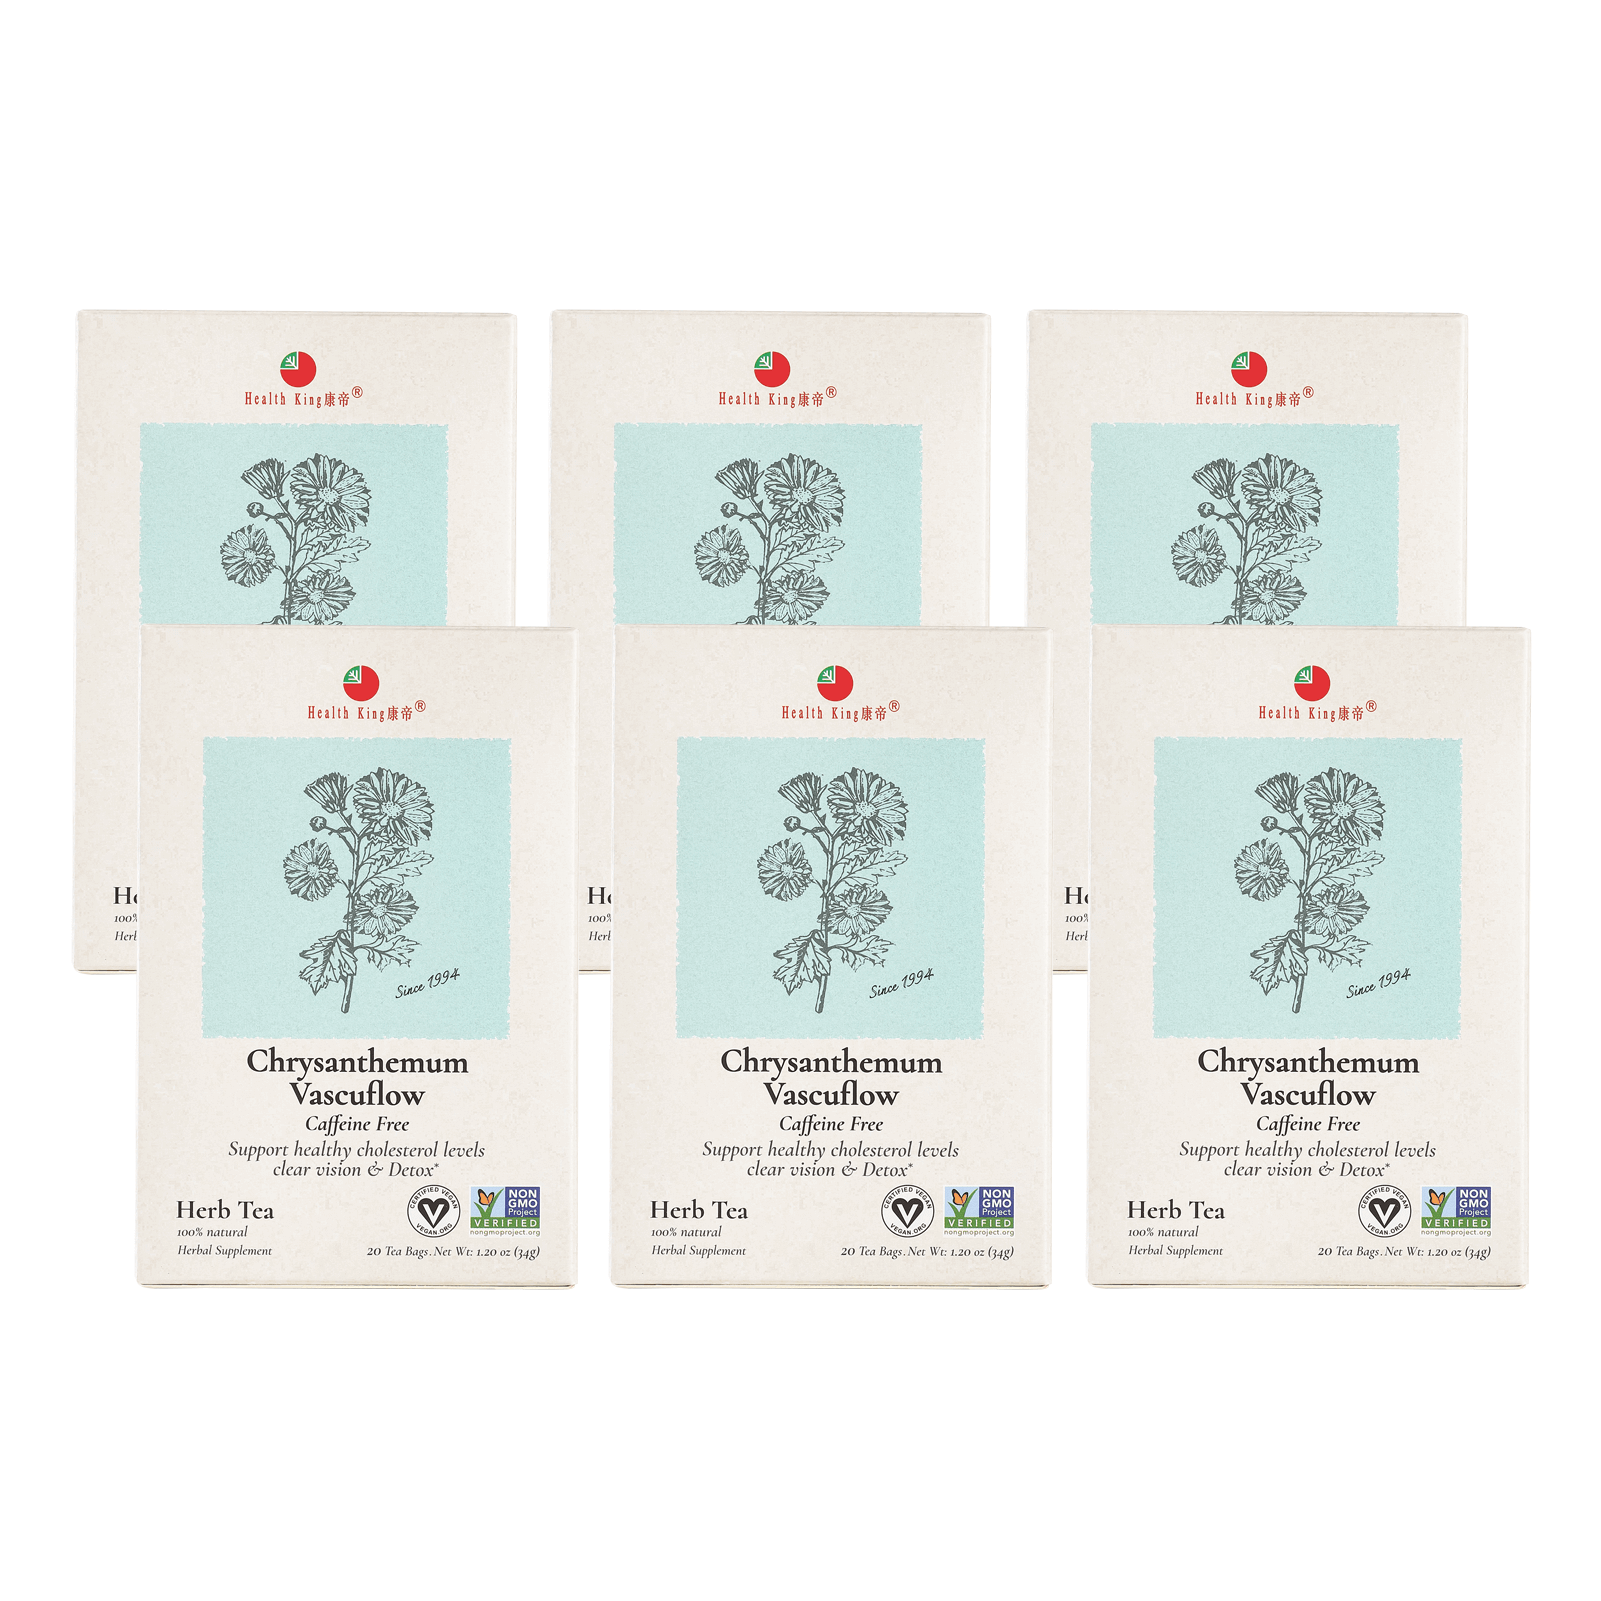 A collection of six Chrysanthemum Herb Tea packets arranged on a white surface